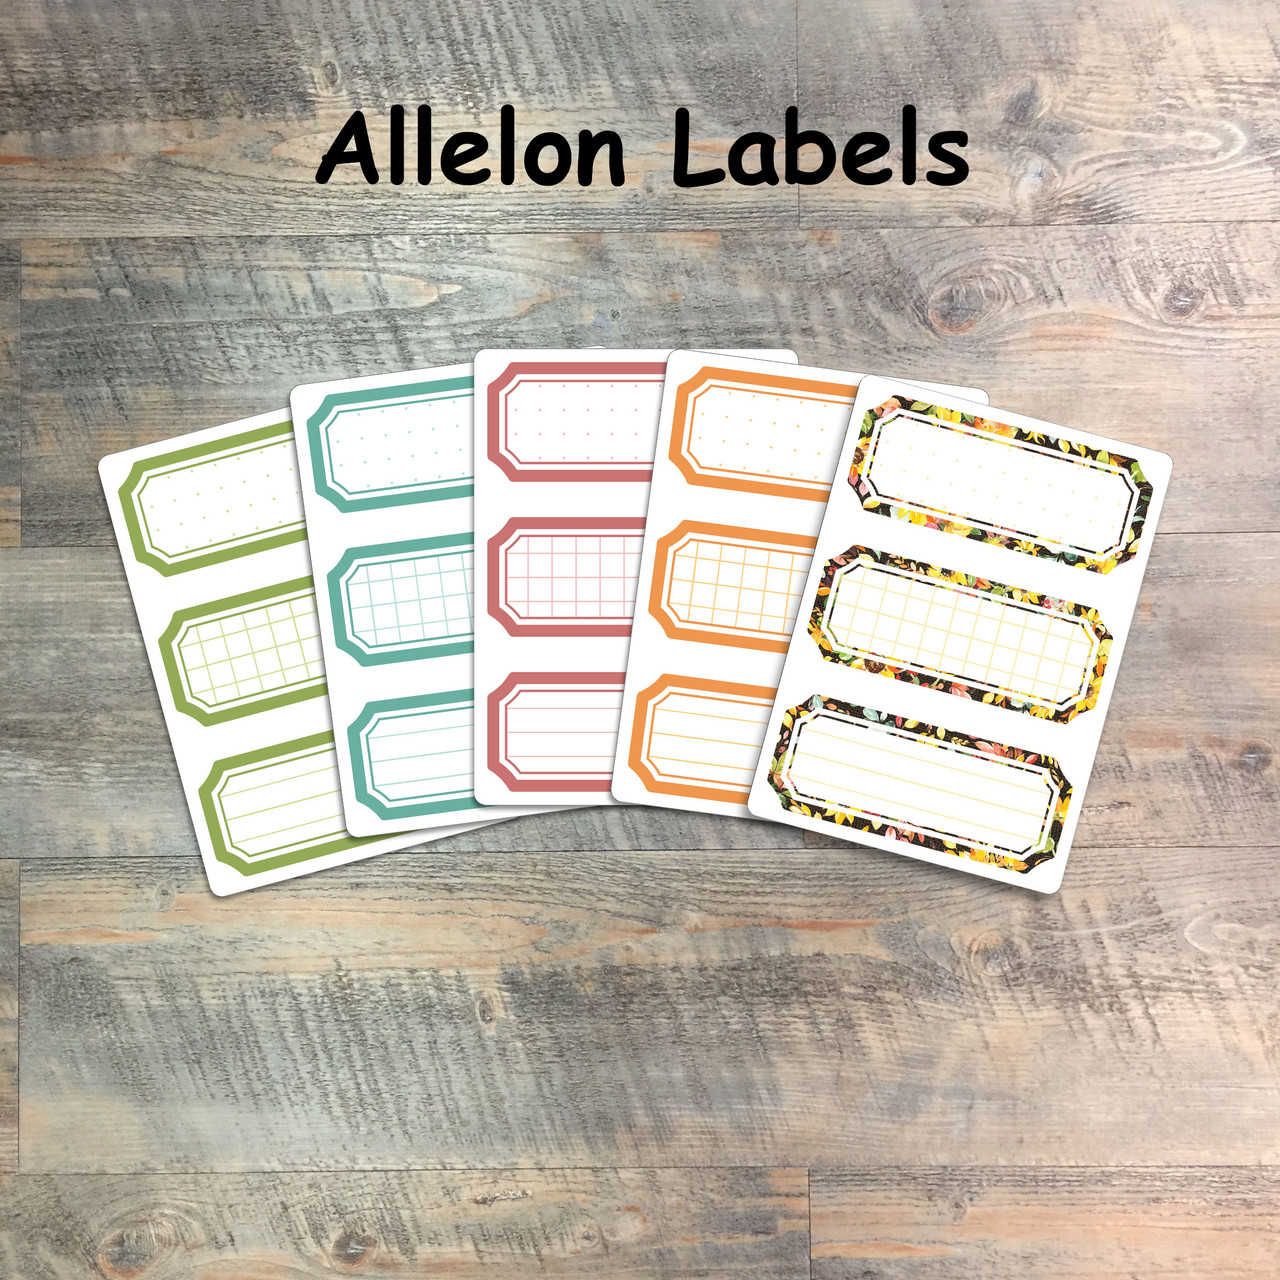 Allelon Labels - 5 Sheets of Label Stickers from BTW4G- Inspired by "One Another"